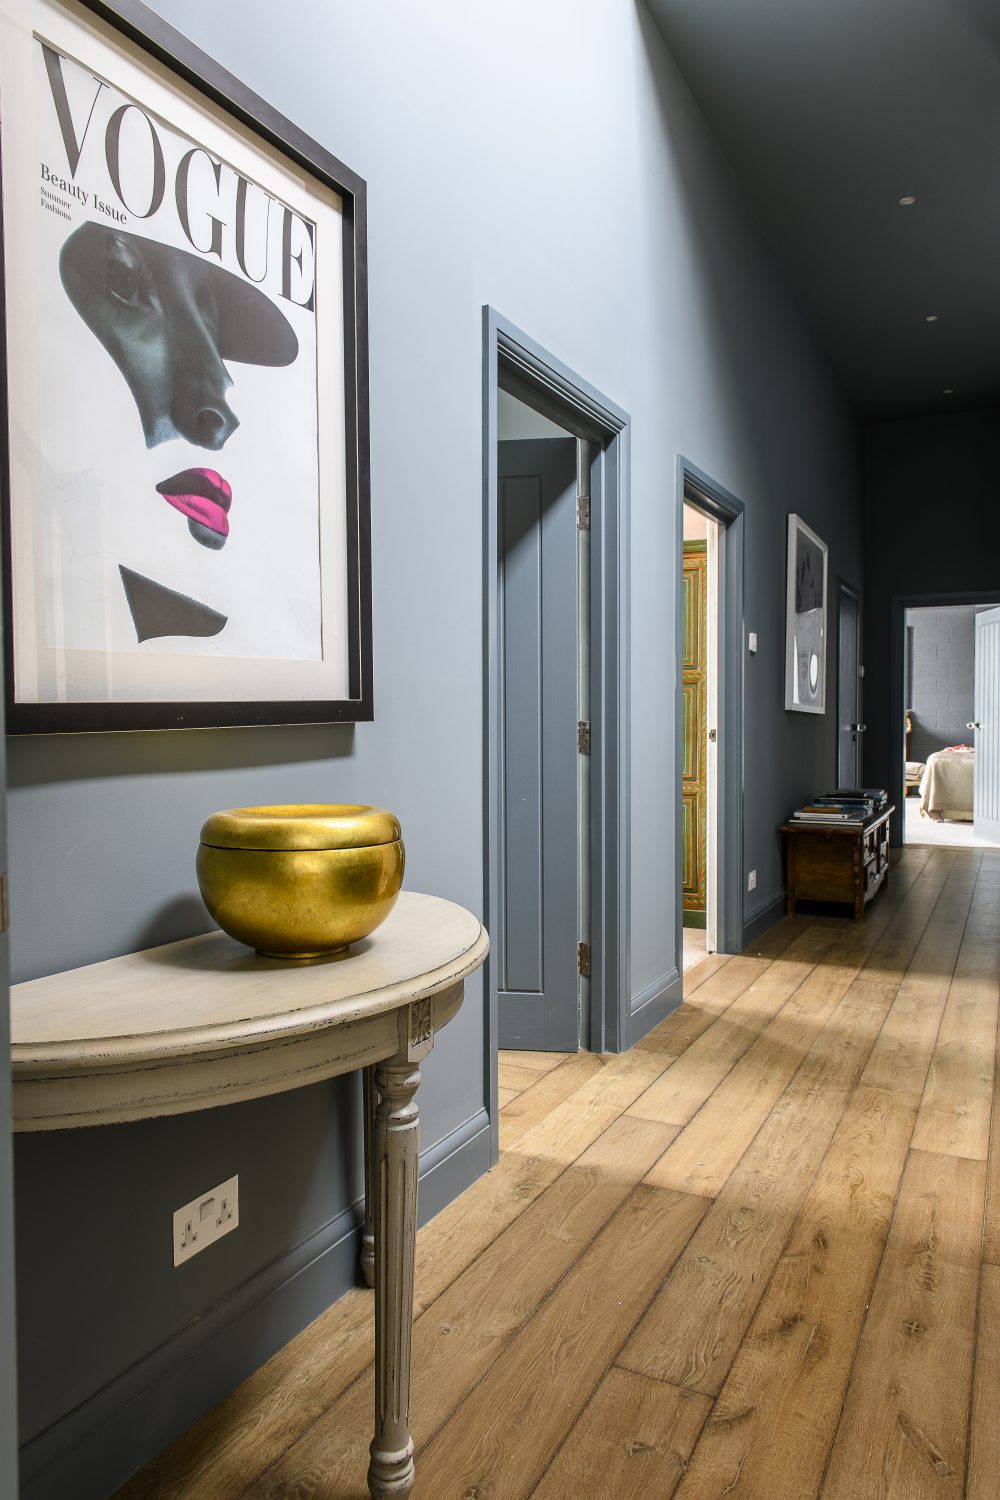 The bedroom hallway is painted in De Nimes by Farrow & Ball. A limited edition Vogue poster hangs above a Chinese bowl